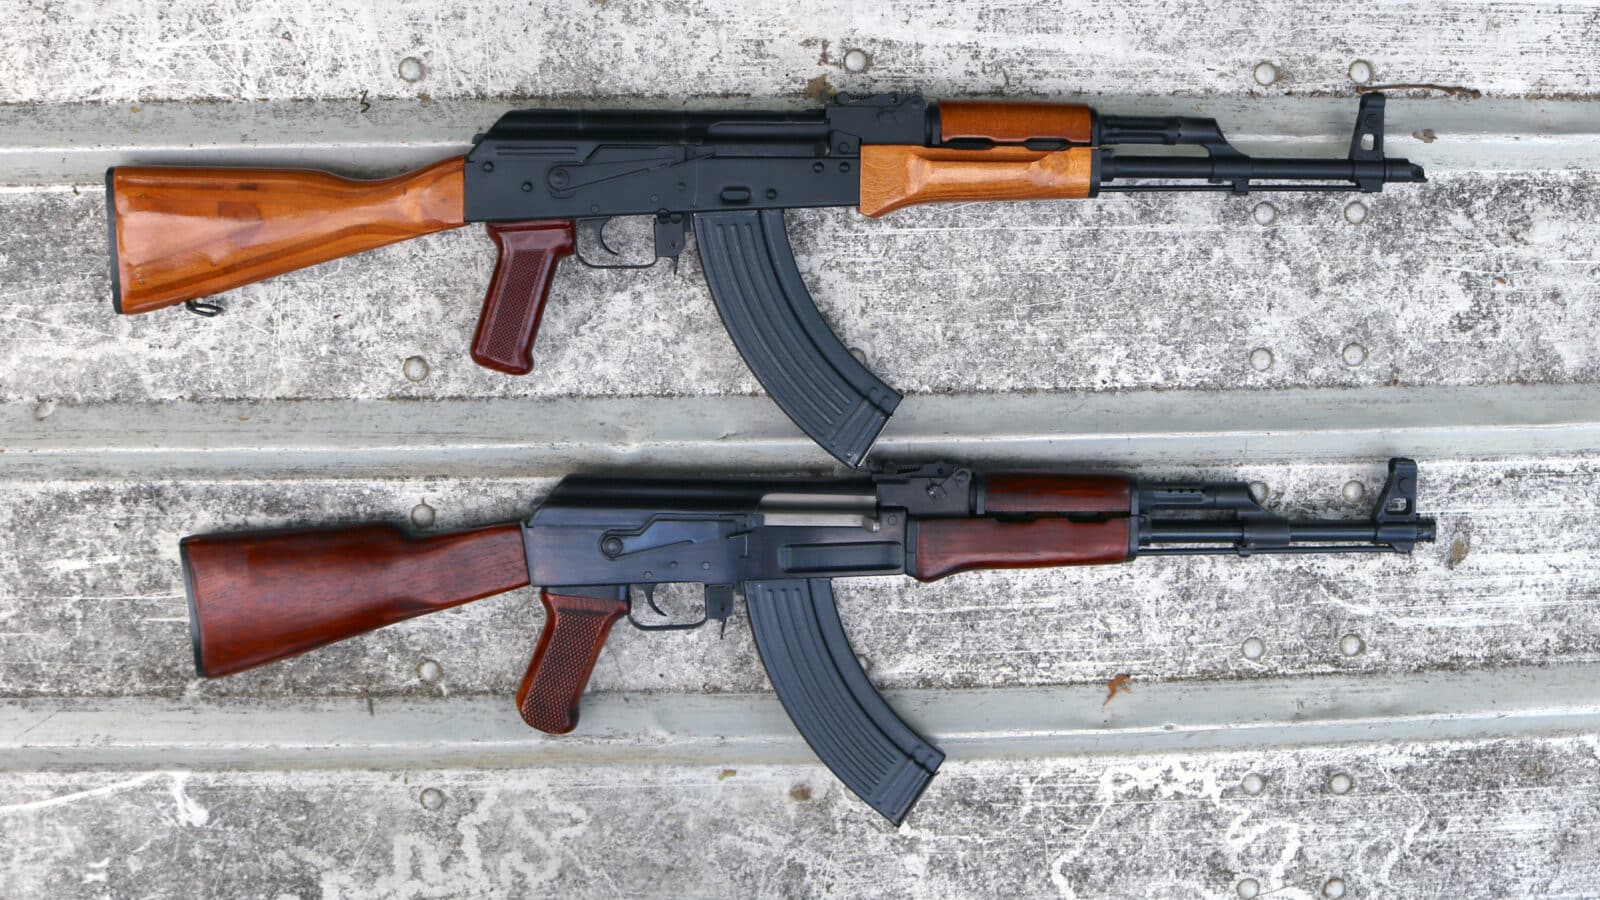 AKM vs. AK-47: What's the Difference? - The Armory Life